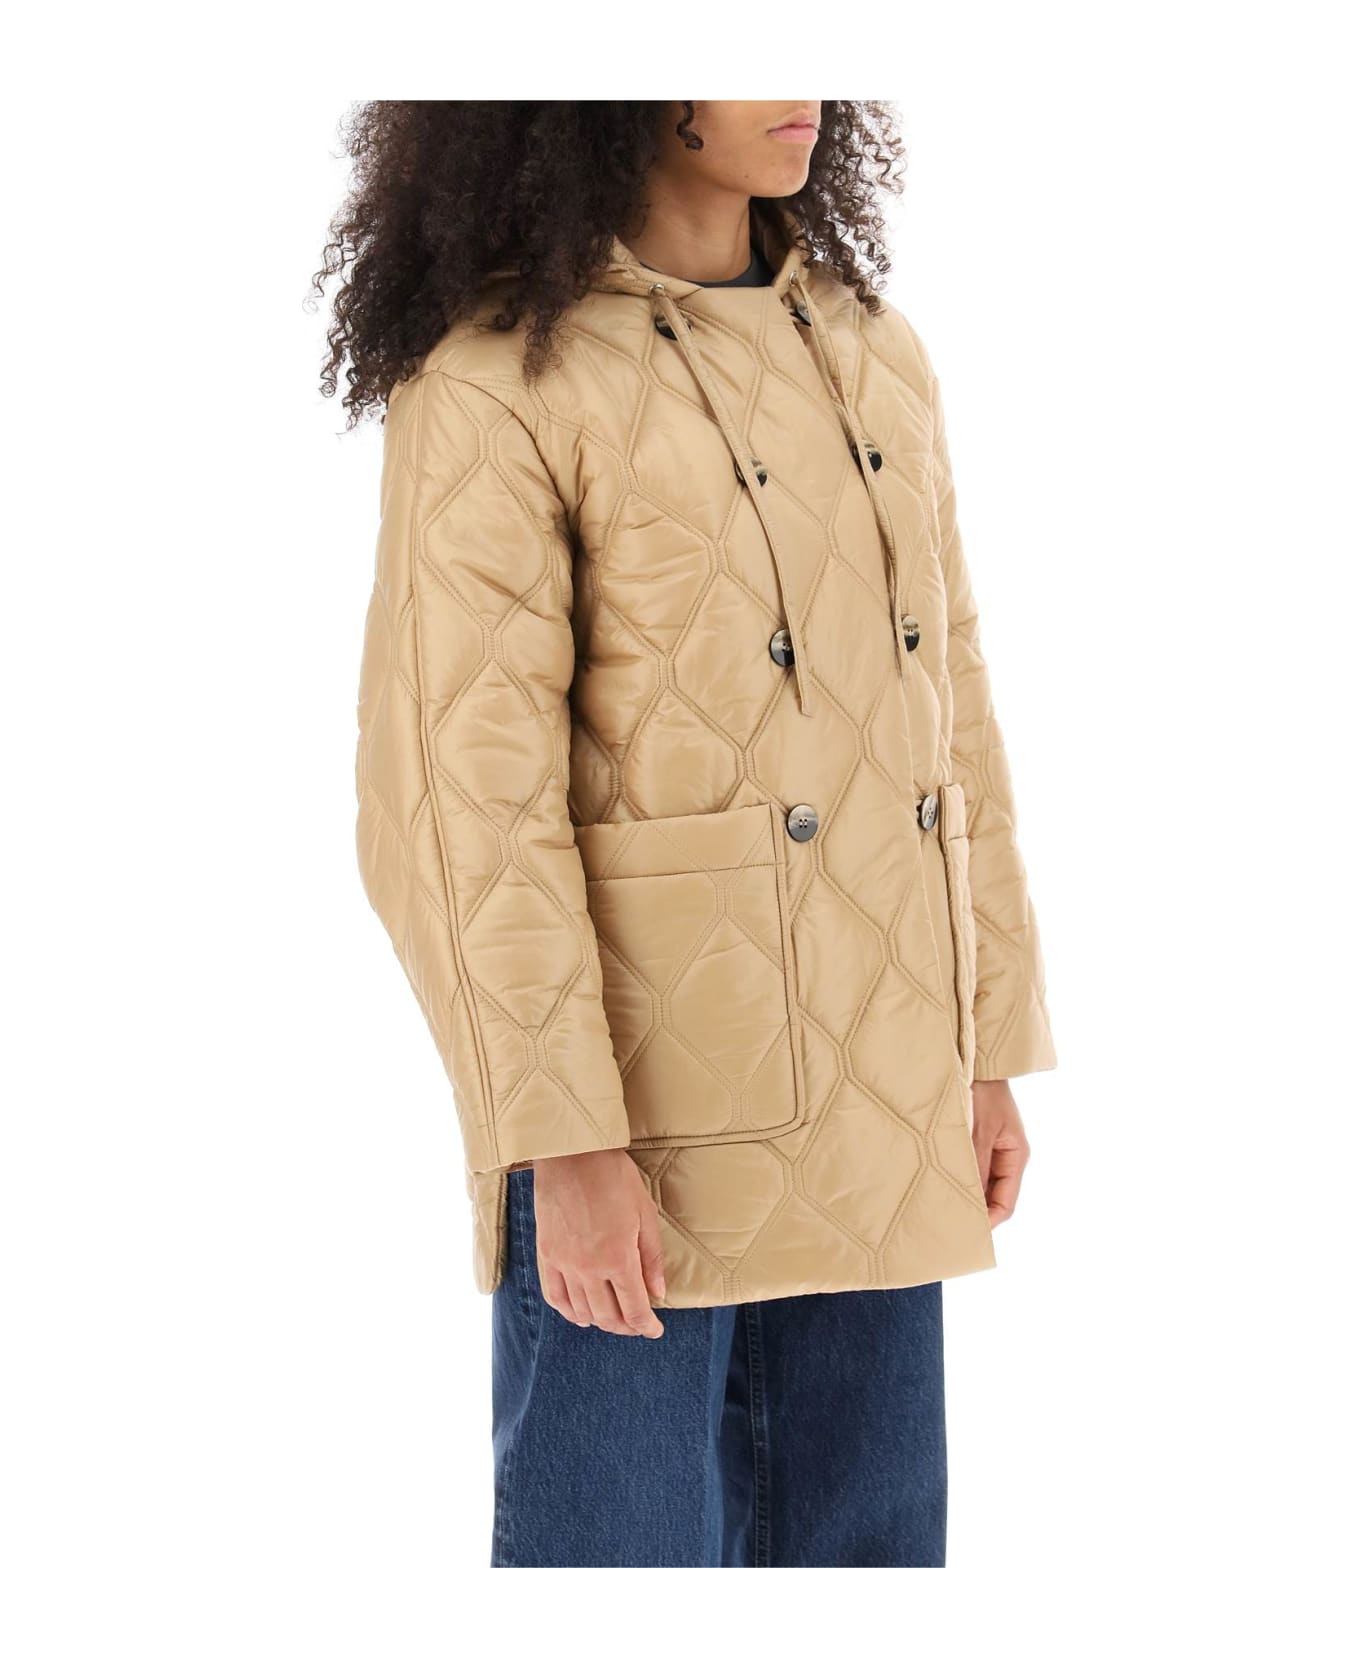 Ganni Hooded Quilted Jacket - TANIN (Beige)